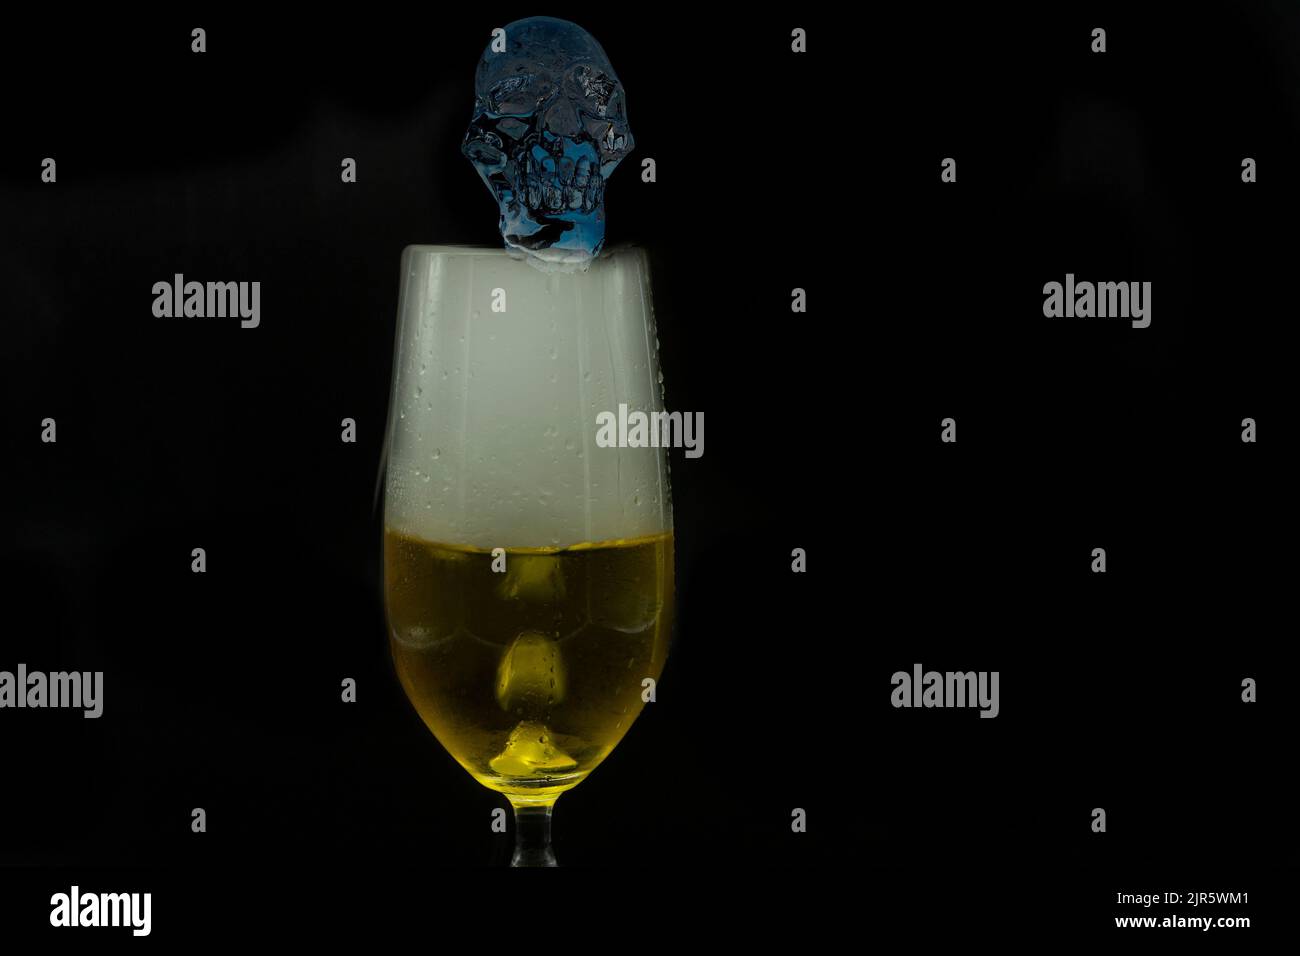 ice human skull decorating glass for extra cold beer steaming with dry ice method for Halloween party mystery nightmare presentation Stock Photo